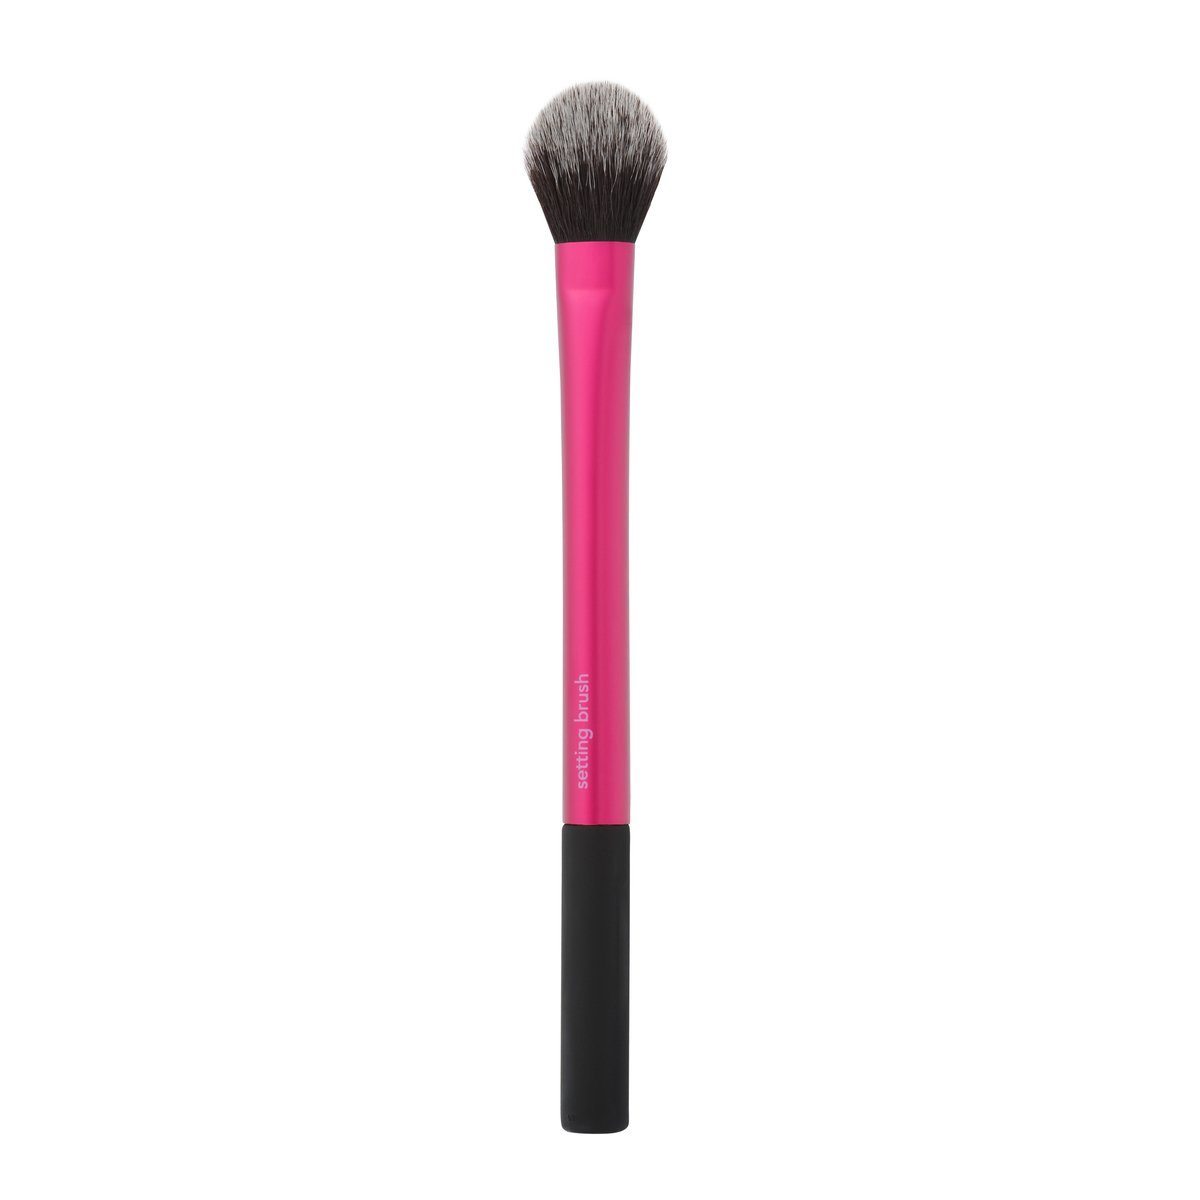 Real Techniques foundation brush